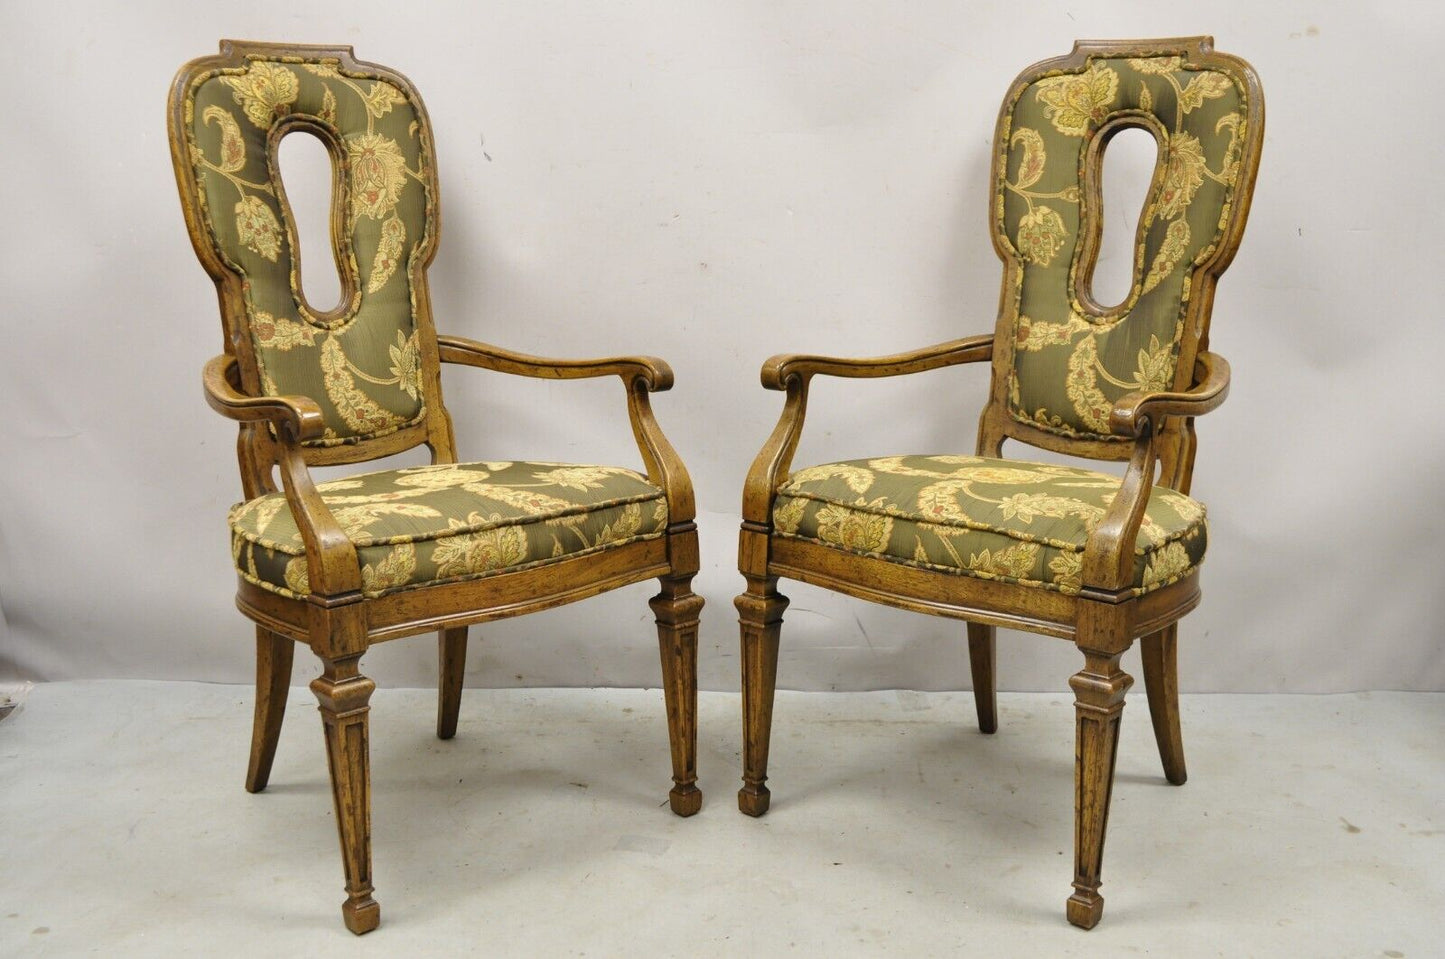 Vintage Hollywood Regency Keyhole Back Fireside Lounge Arm Chairs - a Pair